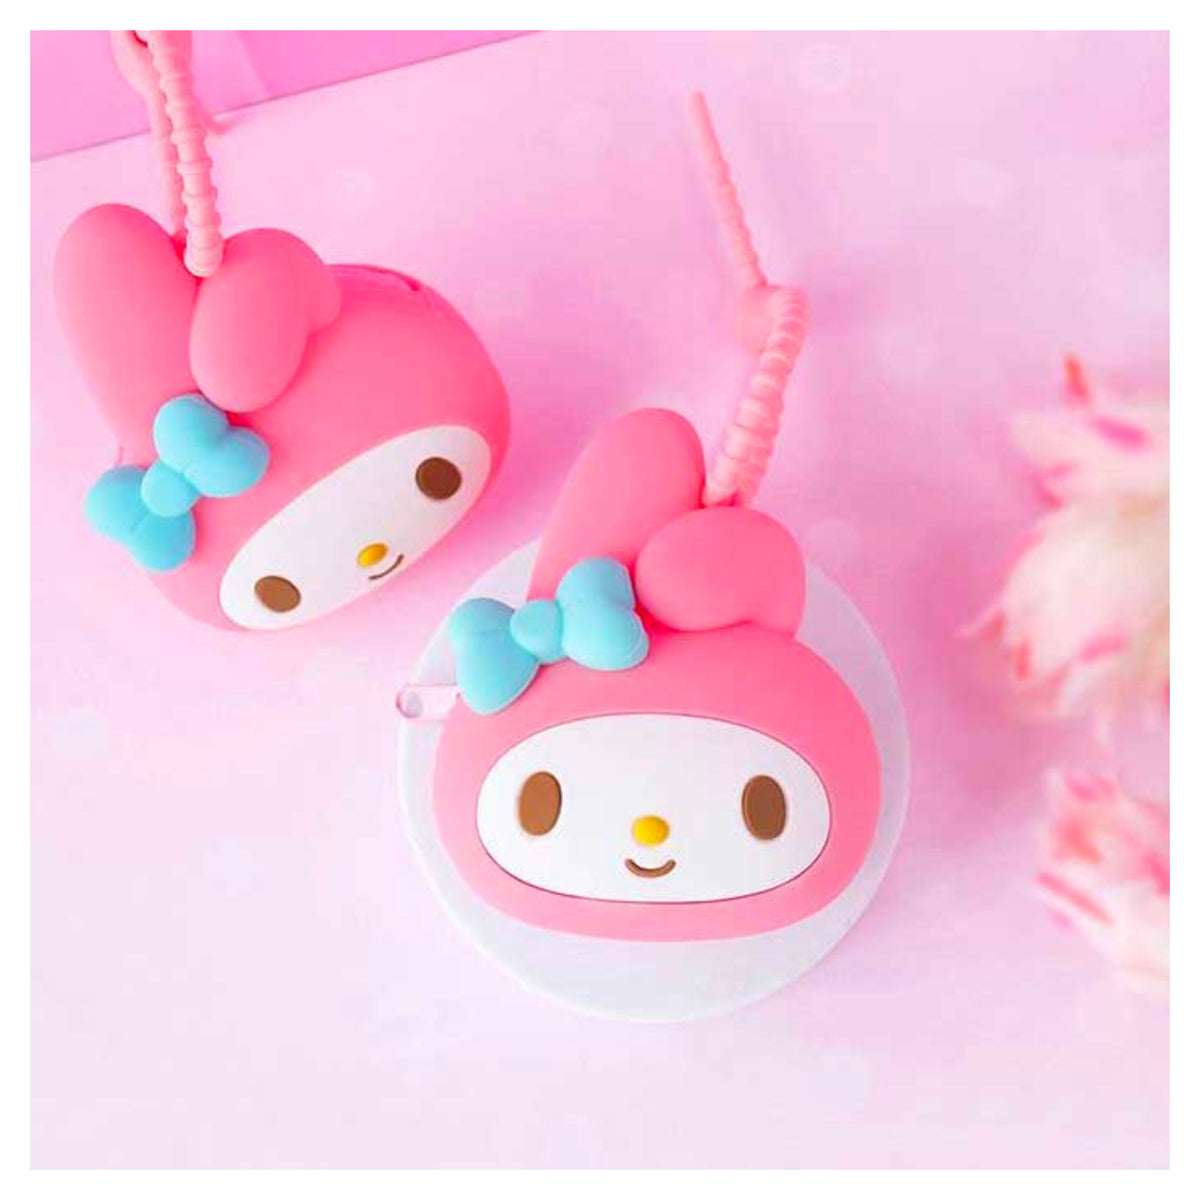 Sanrio Wallet Pouch Charm - My Melody